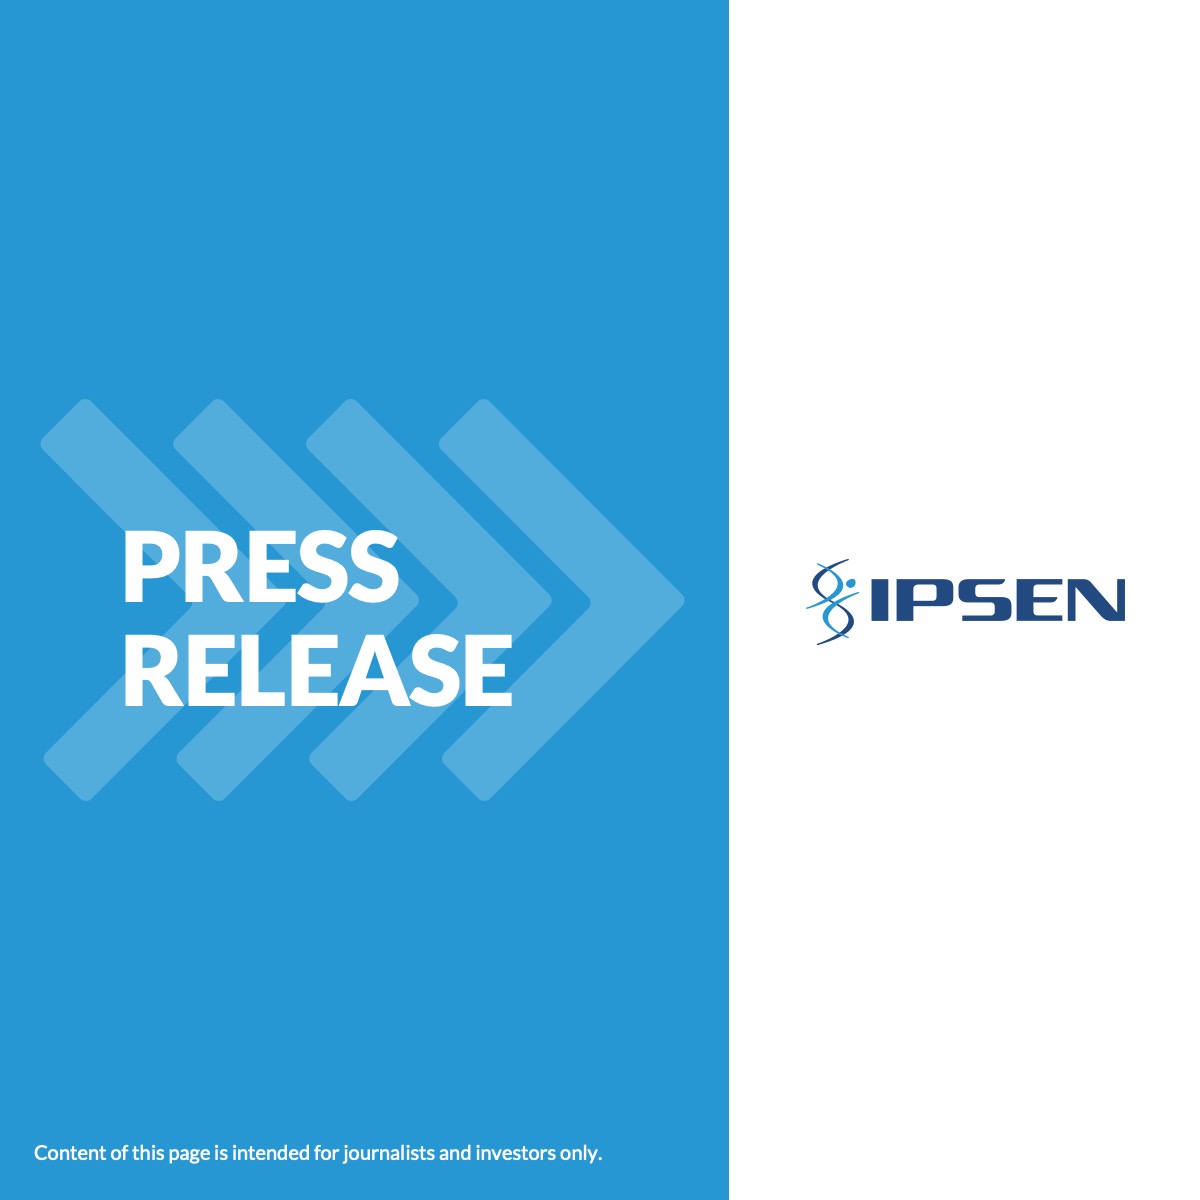 Ipsen achieves simultaneous filing acceptances in the U.S., E.U. and UK for their novel investigational treatment for the rare autoimmune cholestatic liver disease, #PBC For more information: ipsen.com/press-releases…